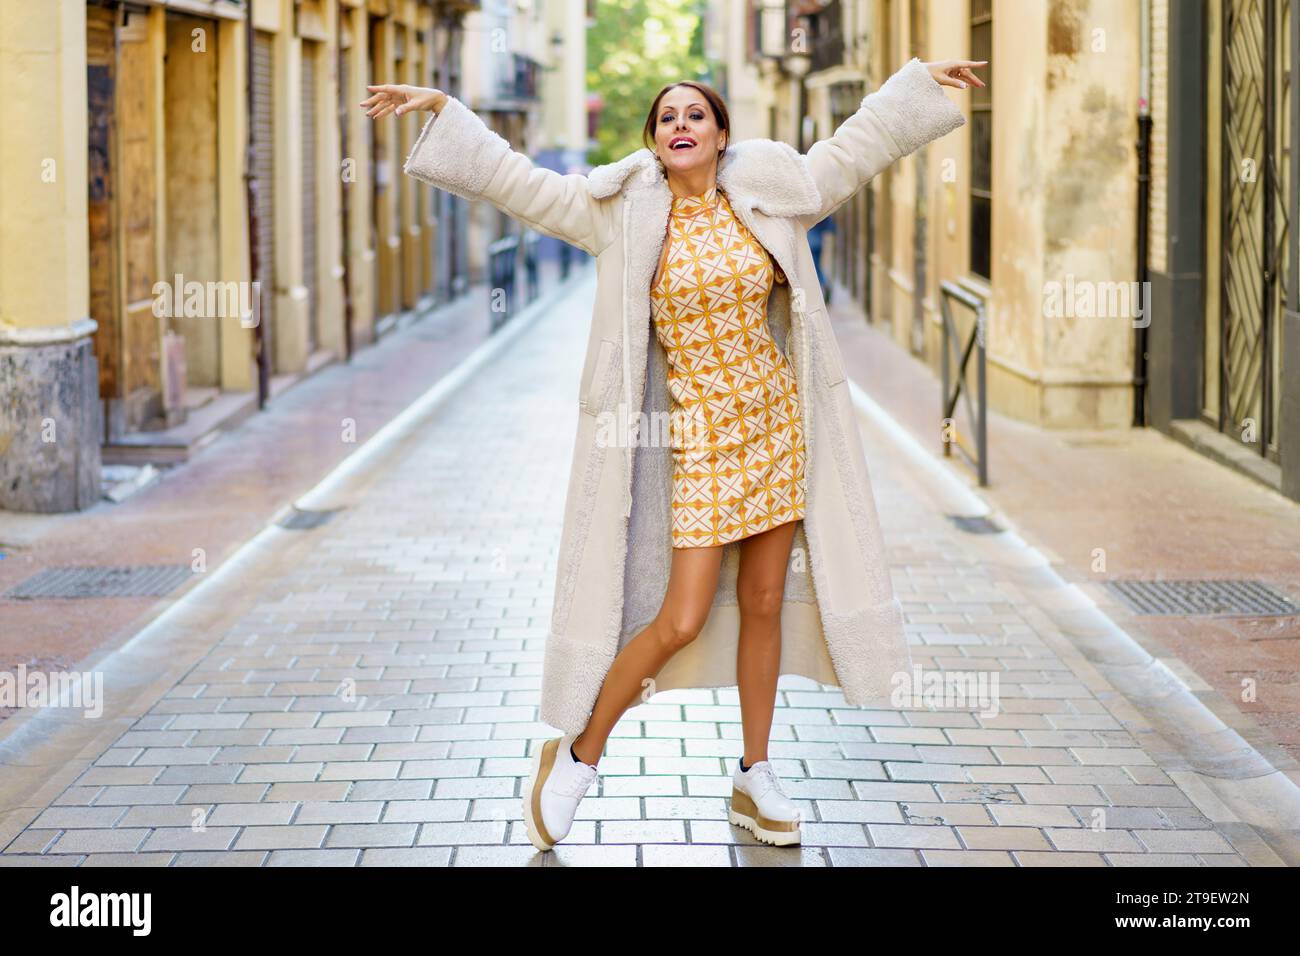 Stylish young woman wearing fashionable long coat with dress and shoe dancing on street against building background Stock Photo